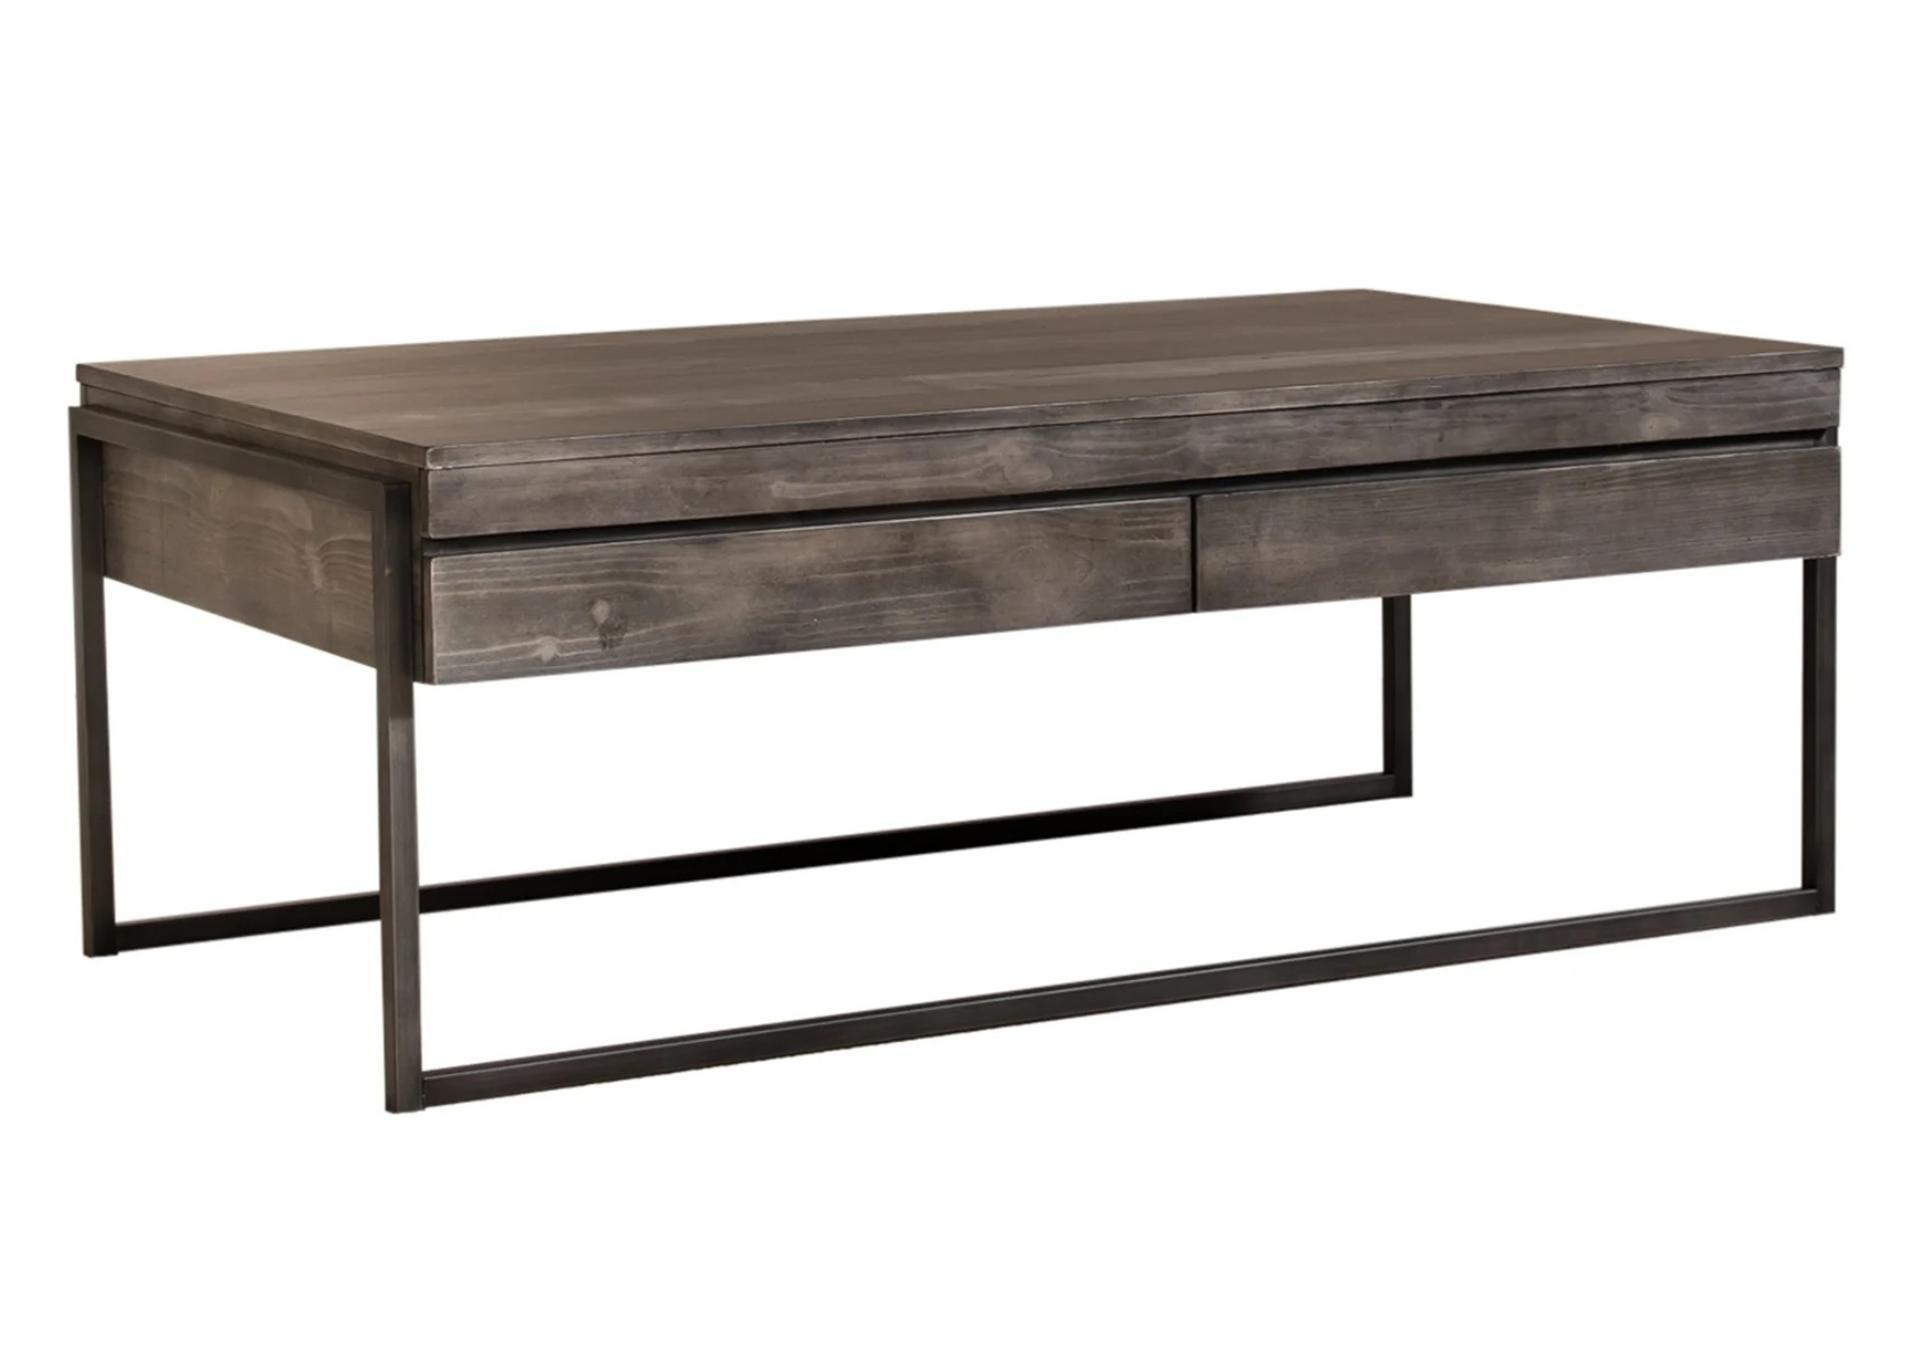 GATEWAY COCKTAIL TABLE,LIBERTY FURNITURE